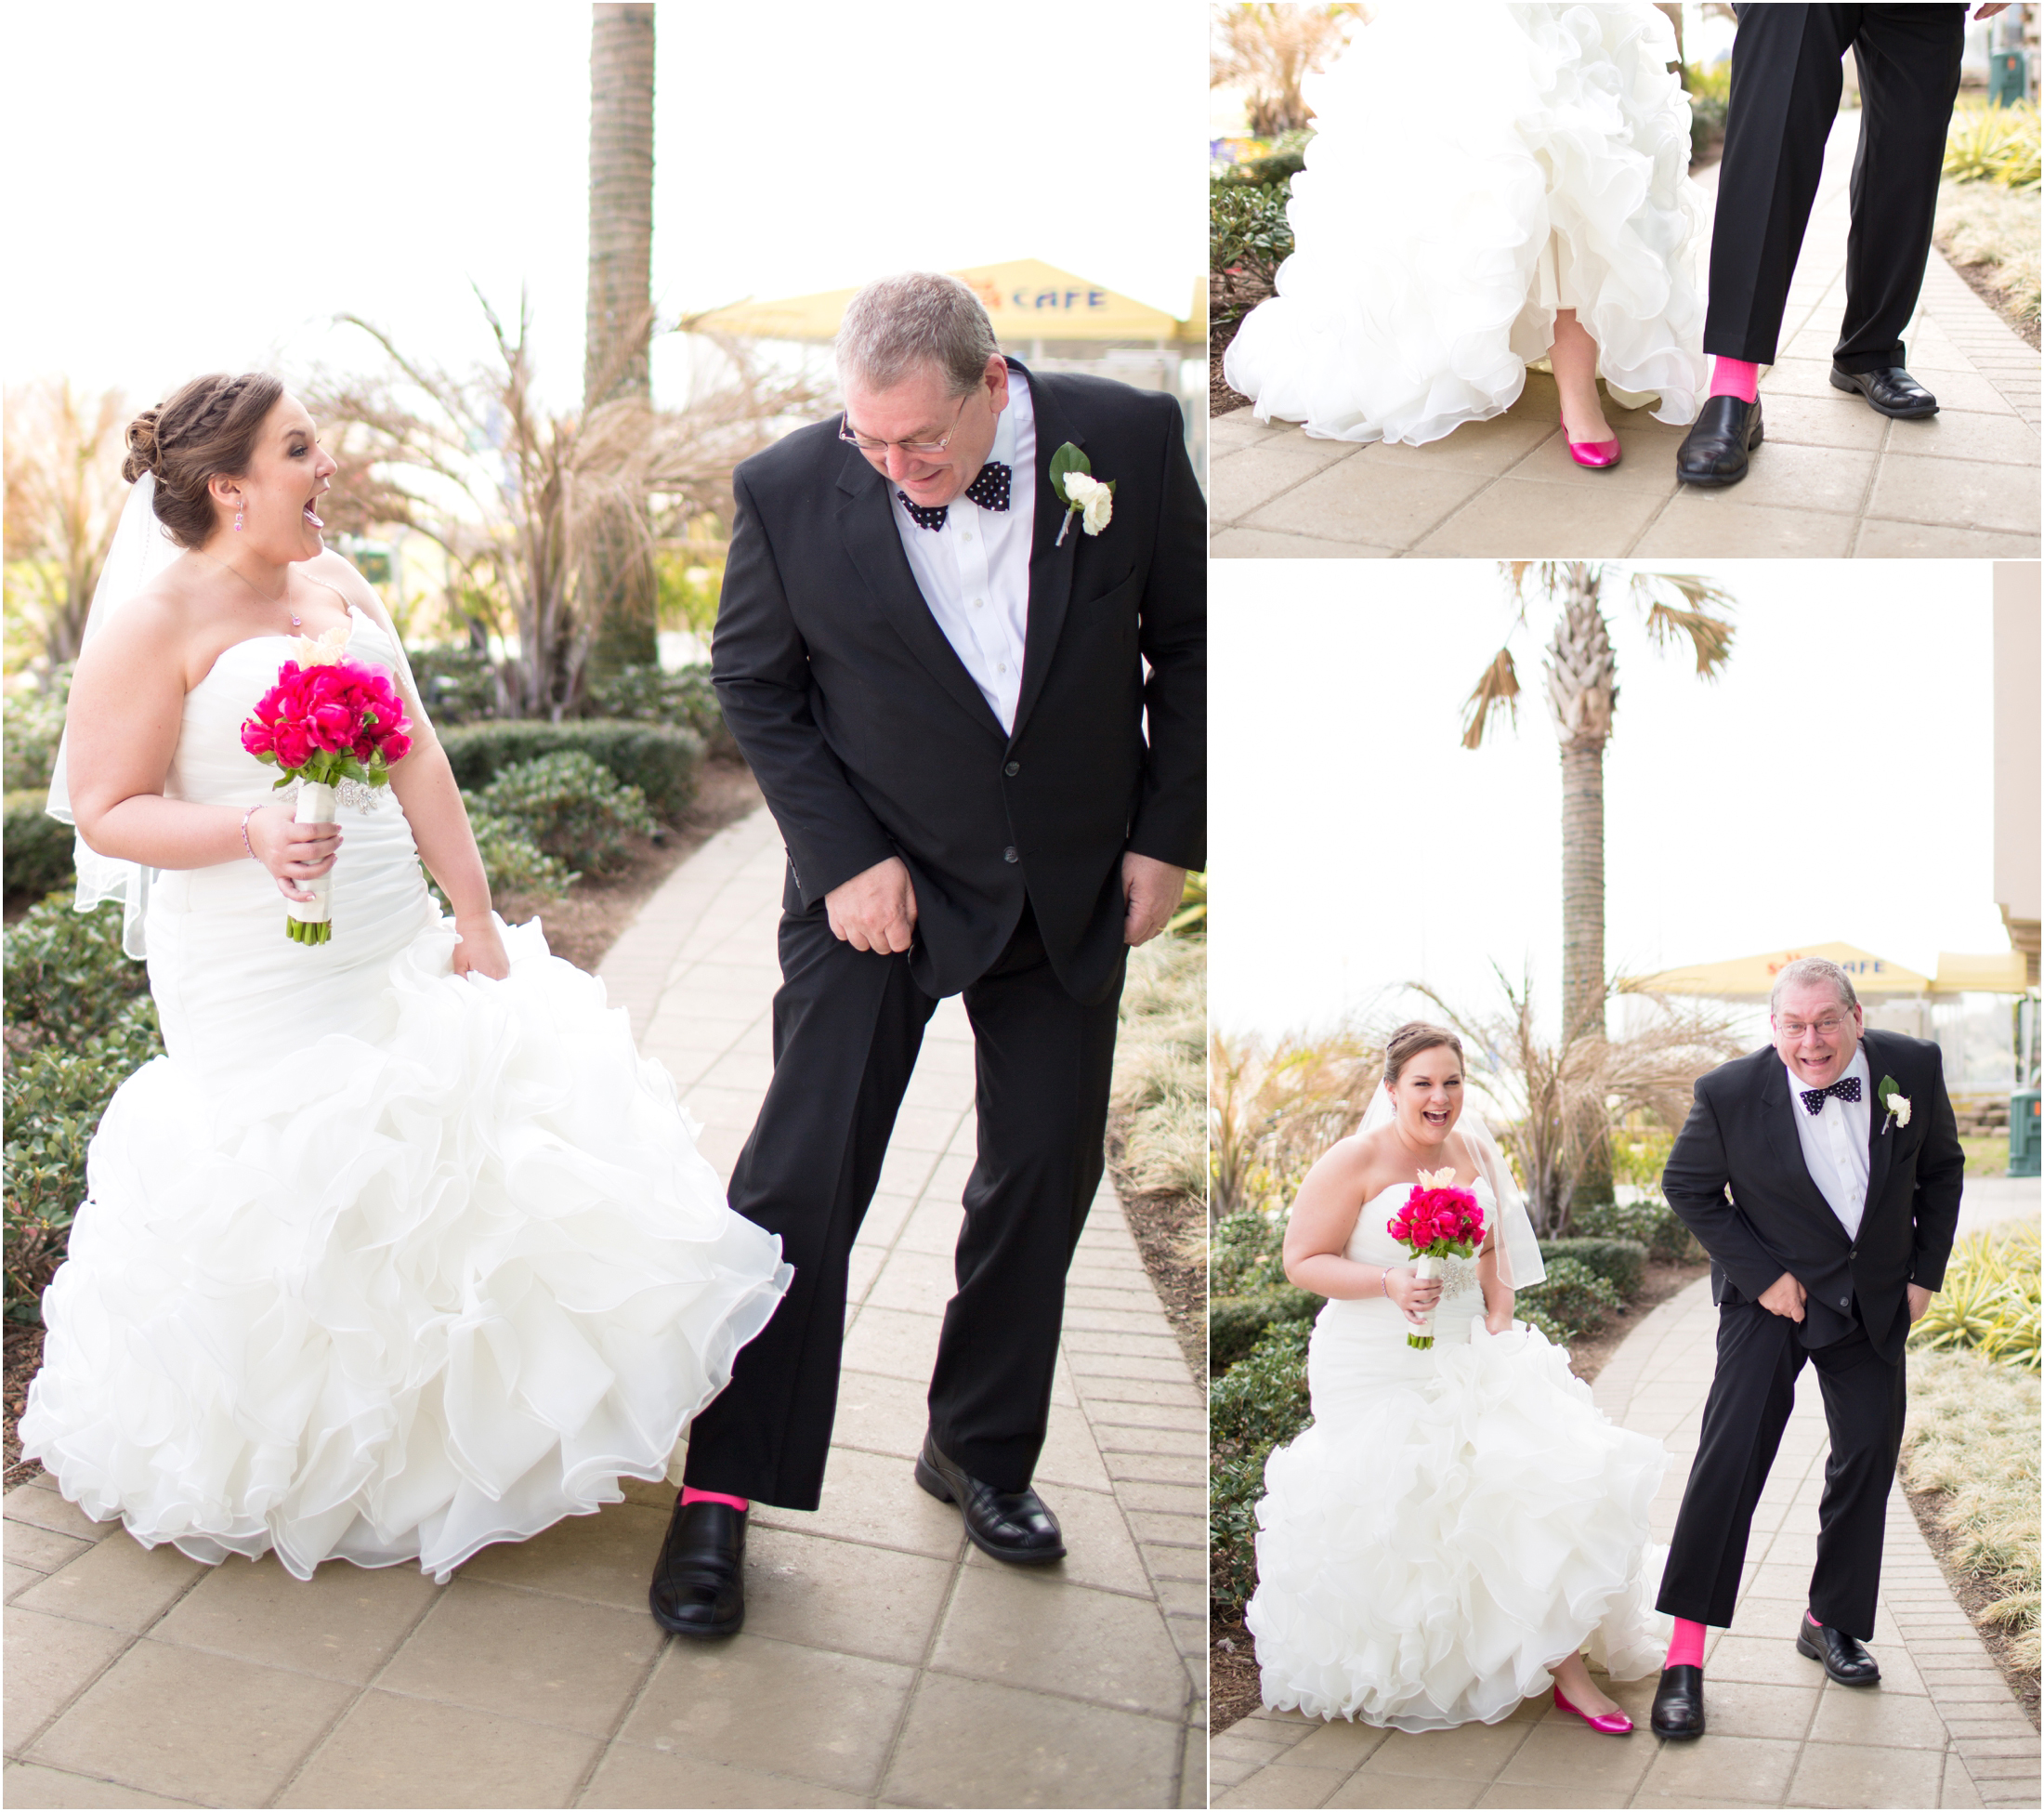  If you don't know Molly, her favorite color is pink. Her dad came out and surprised her by wearing hot pink socks for the wedding!! It was such a fun reveal moment!!&nbsp; 